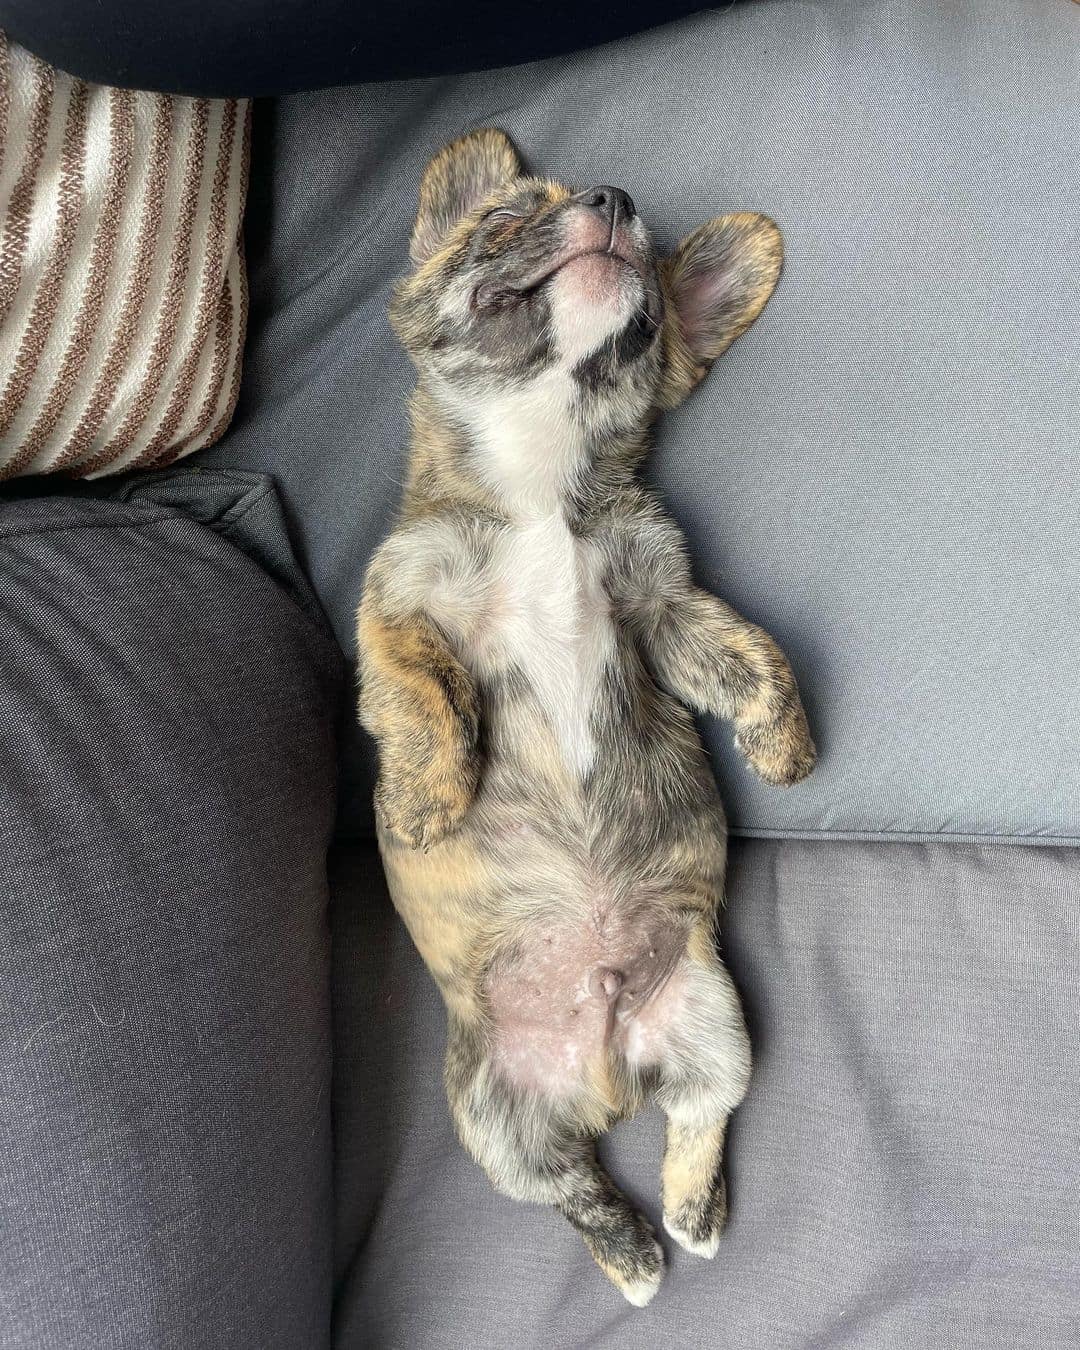 The Corgi French Bulldog Mix lying on the couch